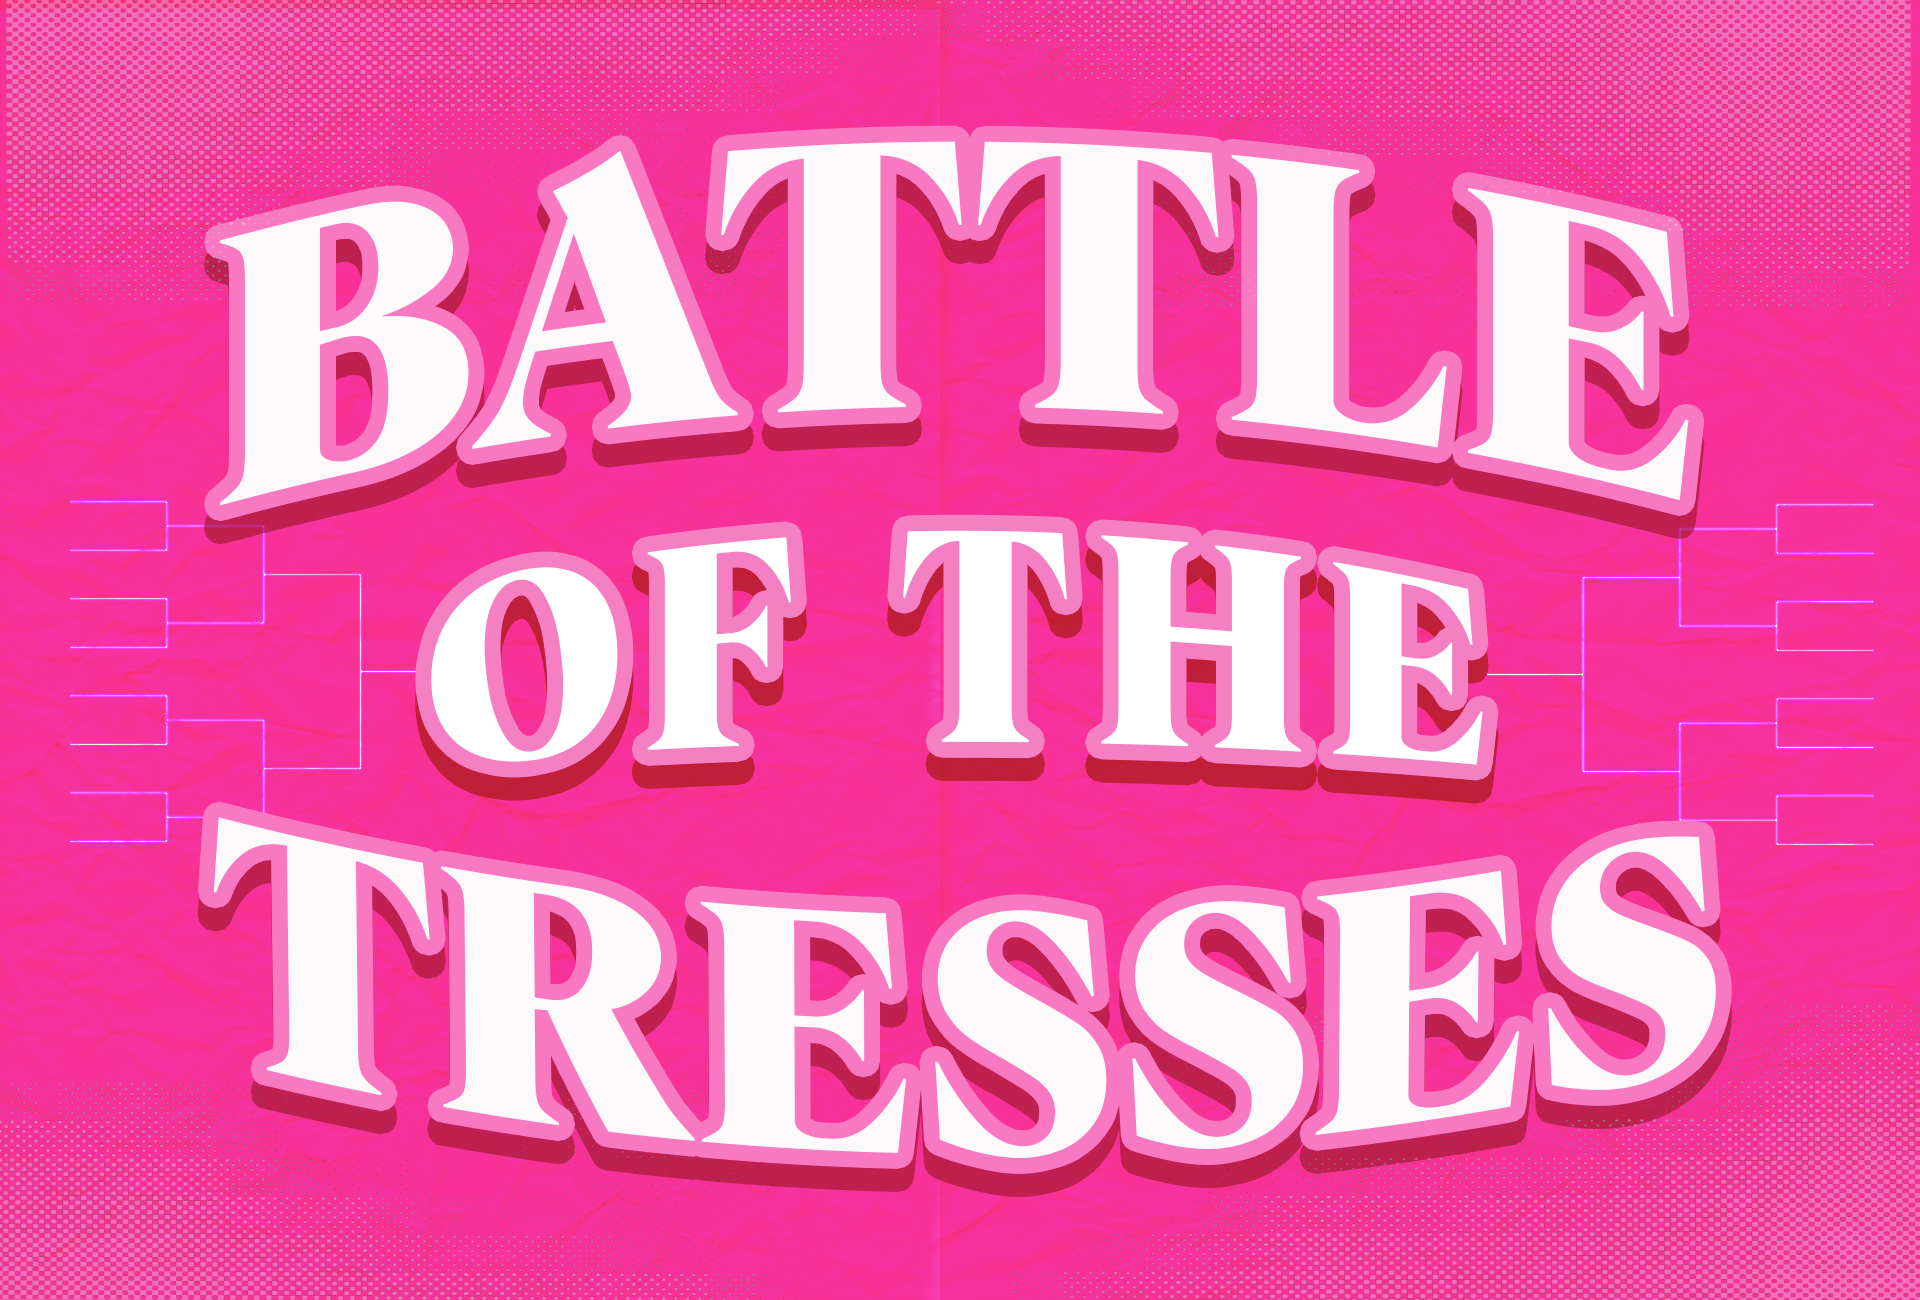 Battle of the Tresses